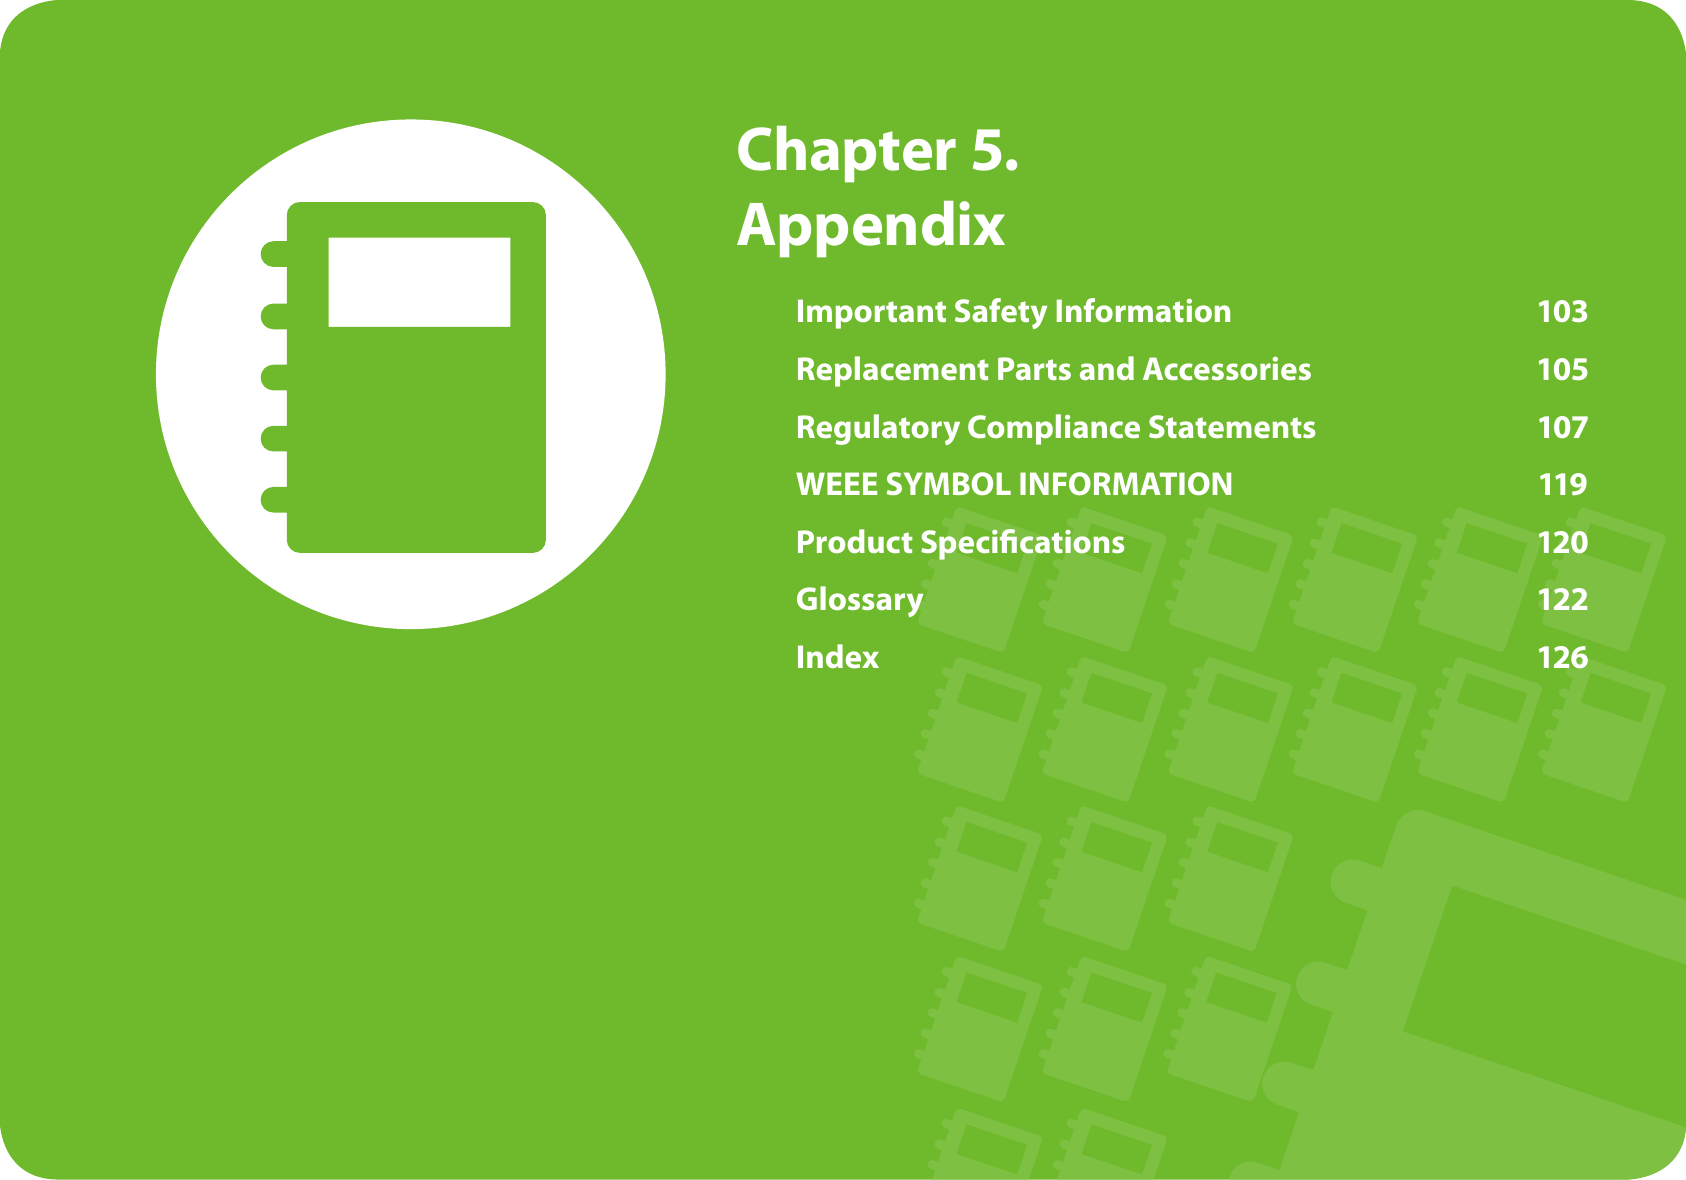 Chapter 5. AppendixImportant Safety Information 103Replacement Parts and Accessories 105Regulatory Compliance Statements 107WEEE SYMBOL INFORMATION 119Product Specications 120Glossary 122Index 126